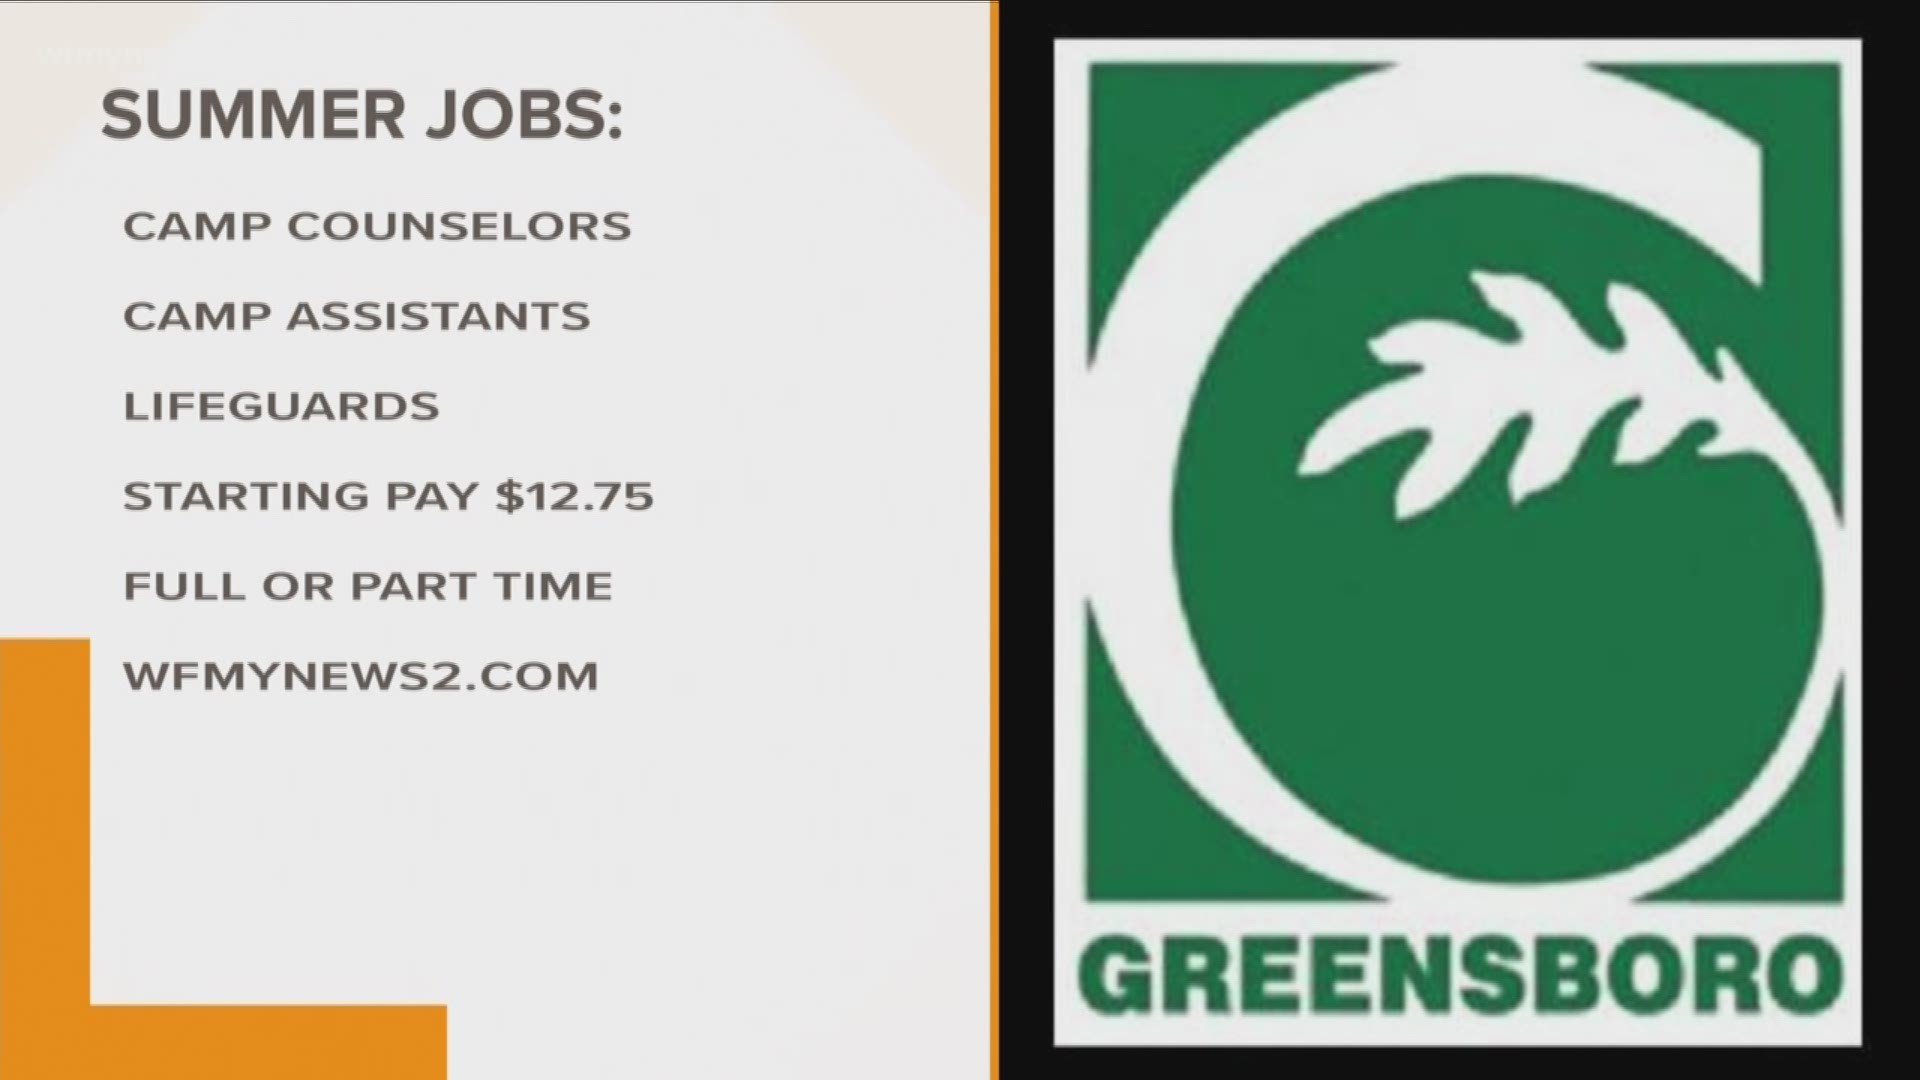 Dozens of summer jobs are now posted in the City of Greensboro. Here’s how to apply.